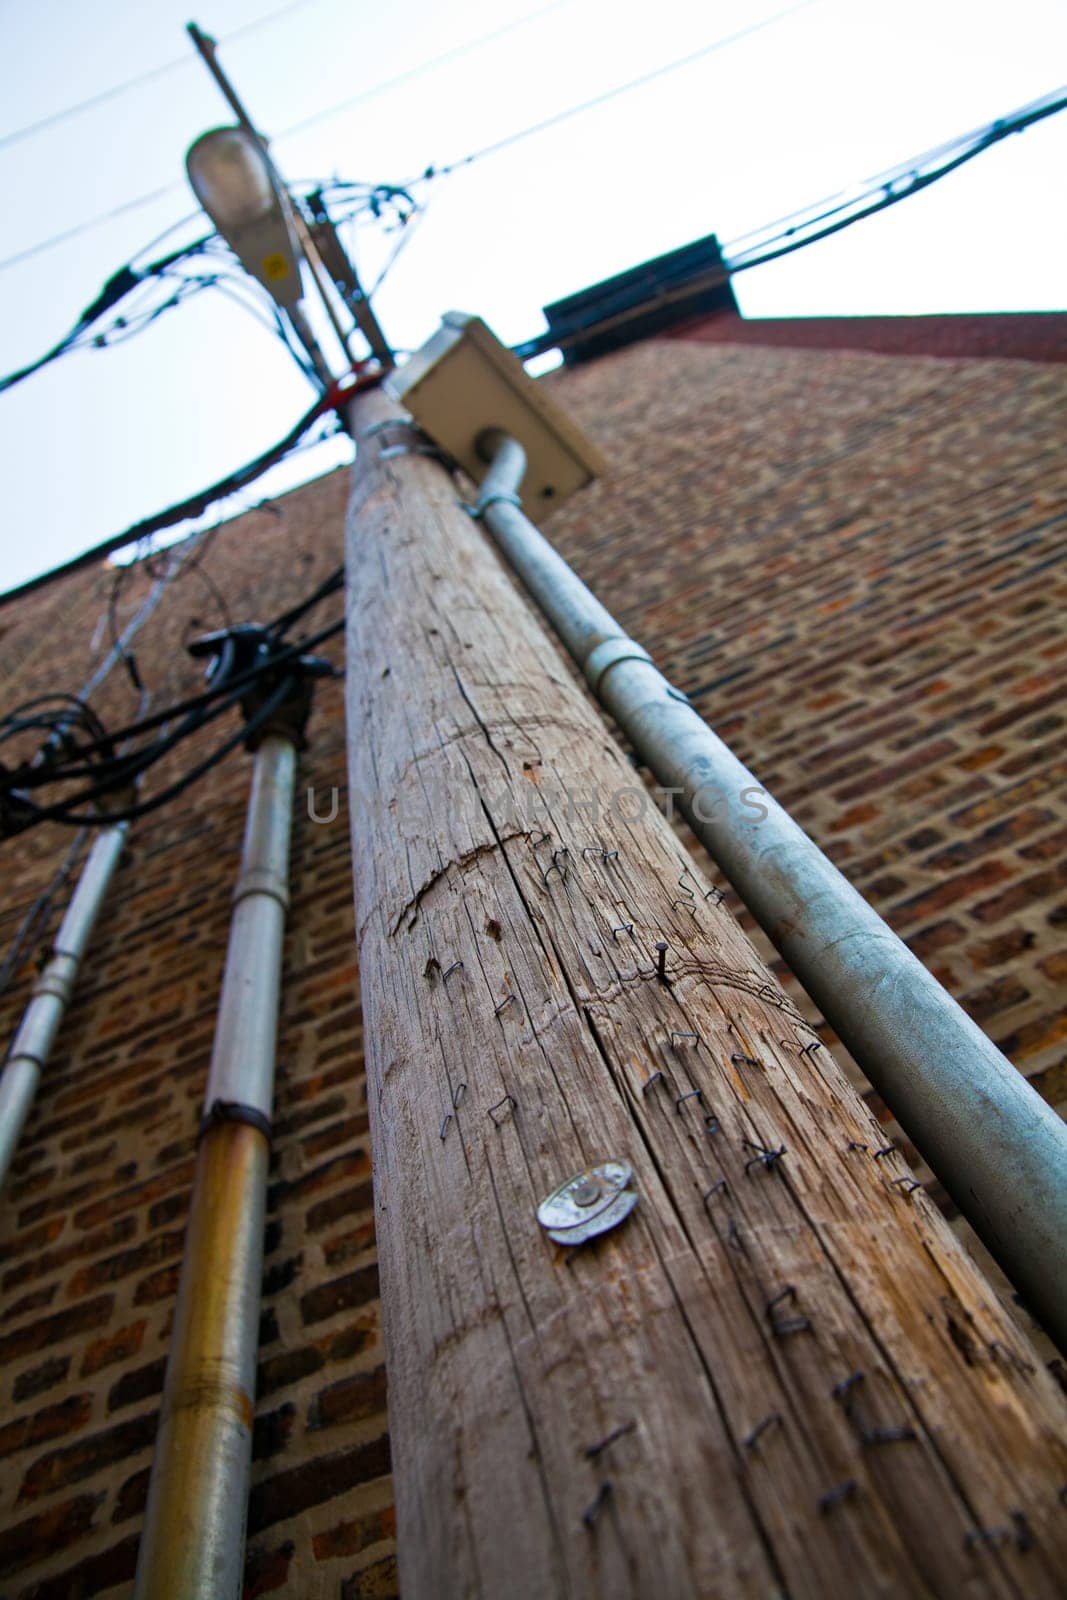 Urban Utility Pole Details Against Chicago Brick Building Backdrop by njproductions